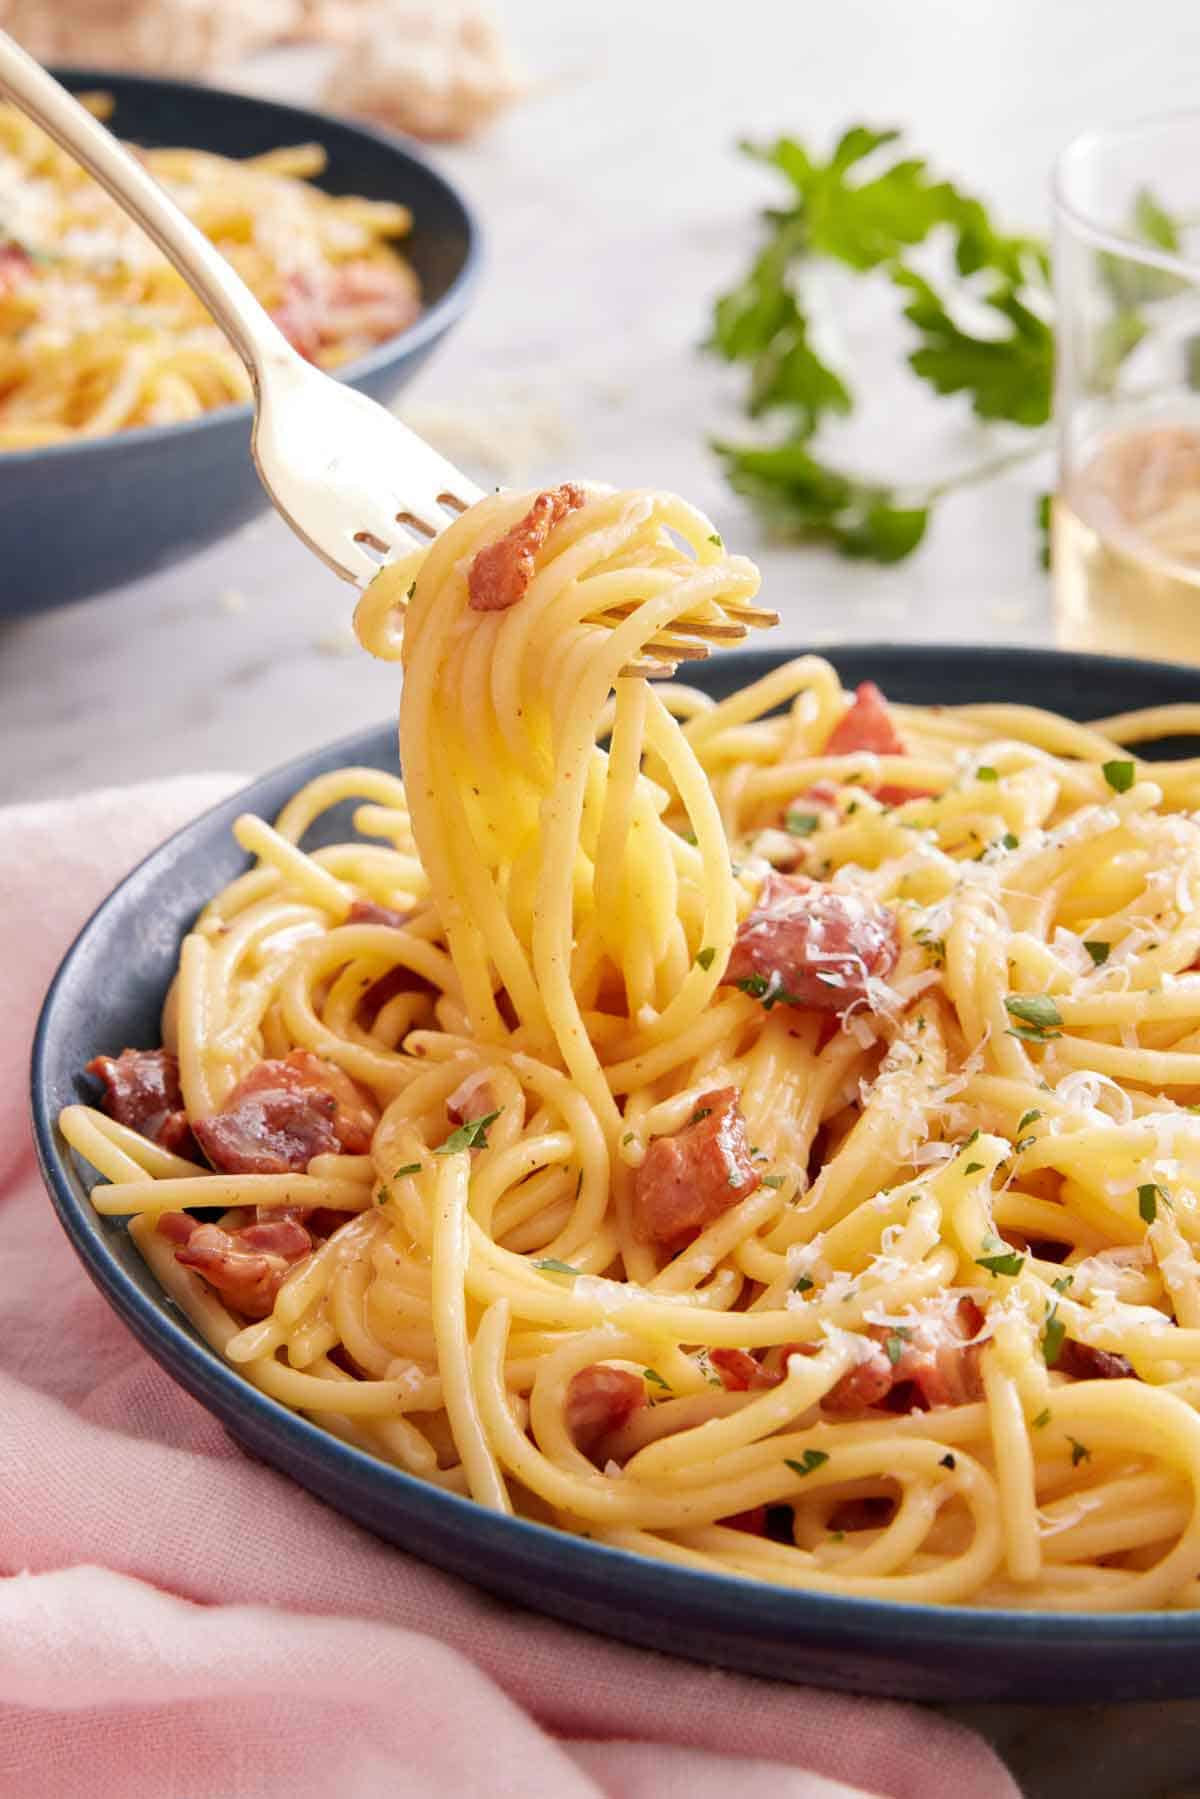 A fork lifting up noodles from a plate of pasta carbonara.